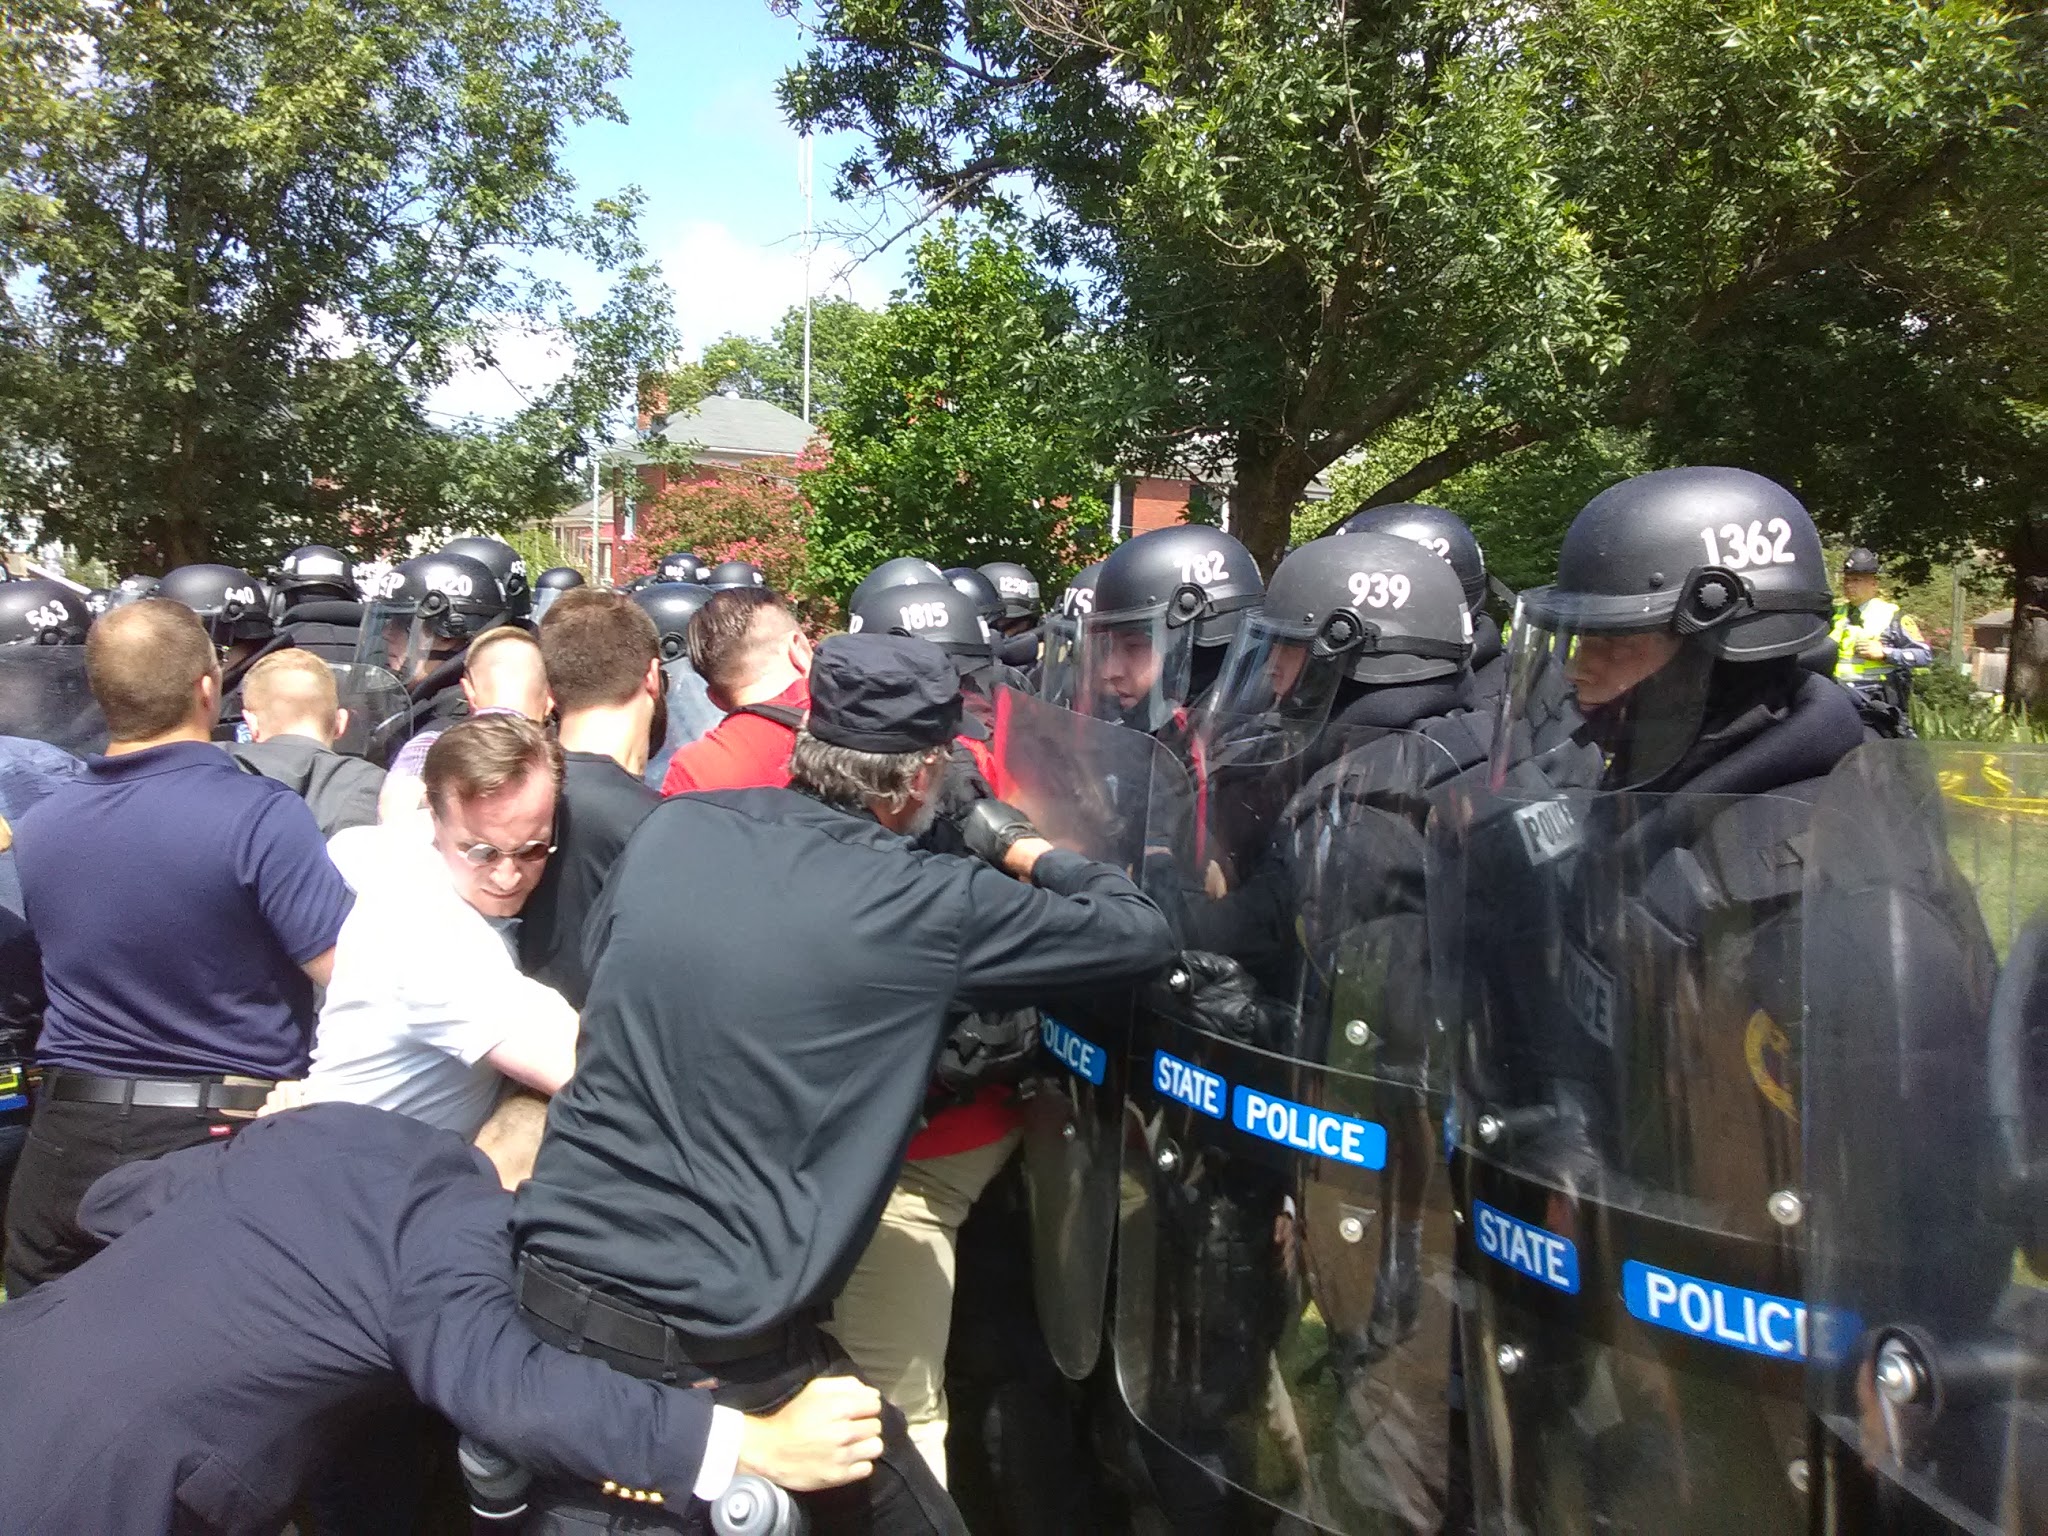 Members of the white supremacist movement push back against police in Charlottesville (Ted Goodman, TheDCNF)